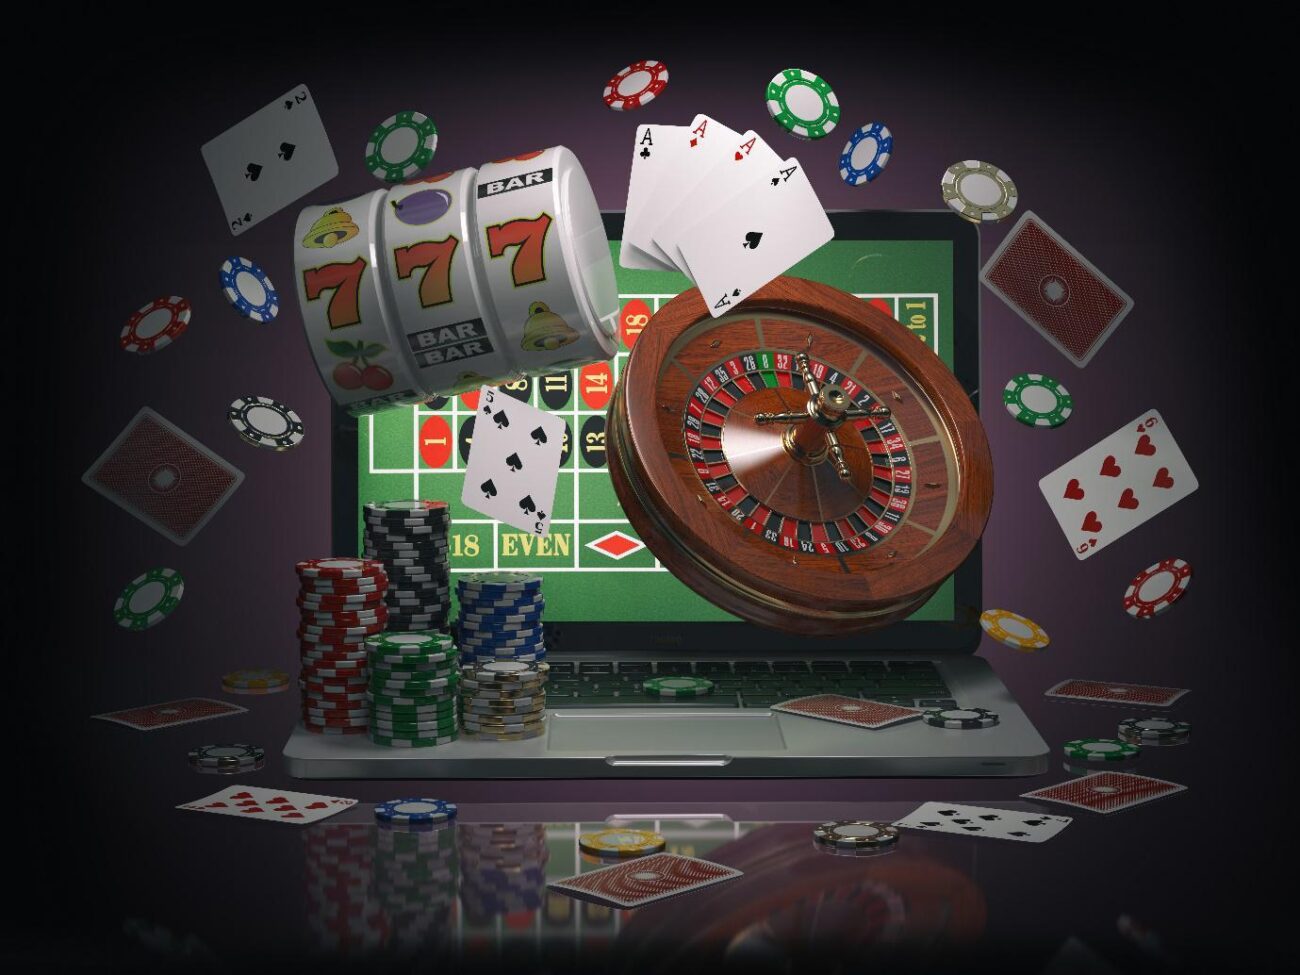 Gambling is always complex, which gives not only joy but also an opportunity to gain money. Online gambling requires choosing the right website.